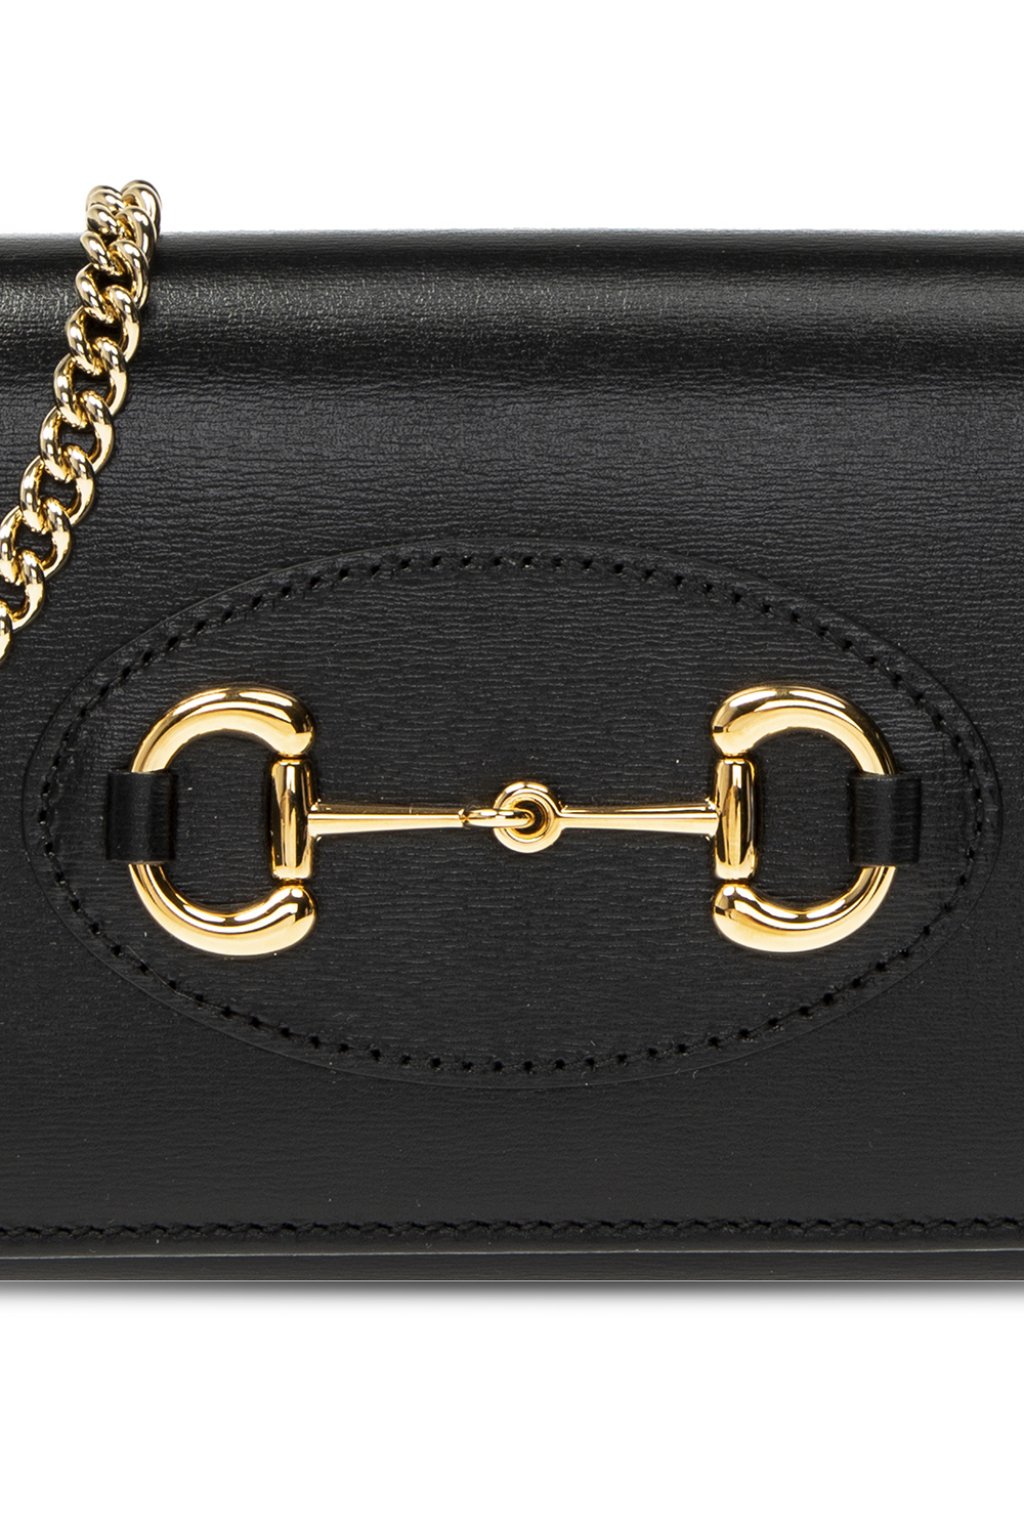 Oh yes, she is POPULAR! ✨🤩 The new Wallet On Chain Lily, $1670